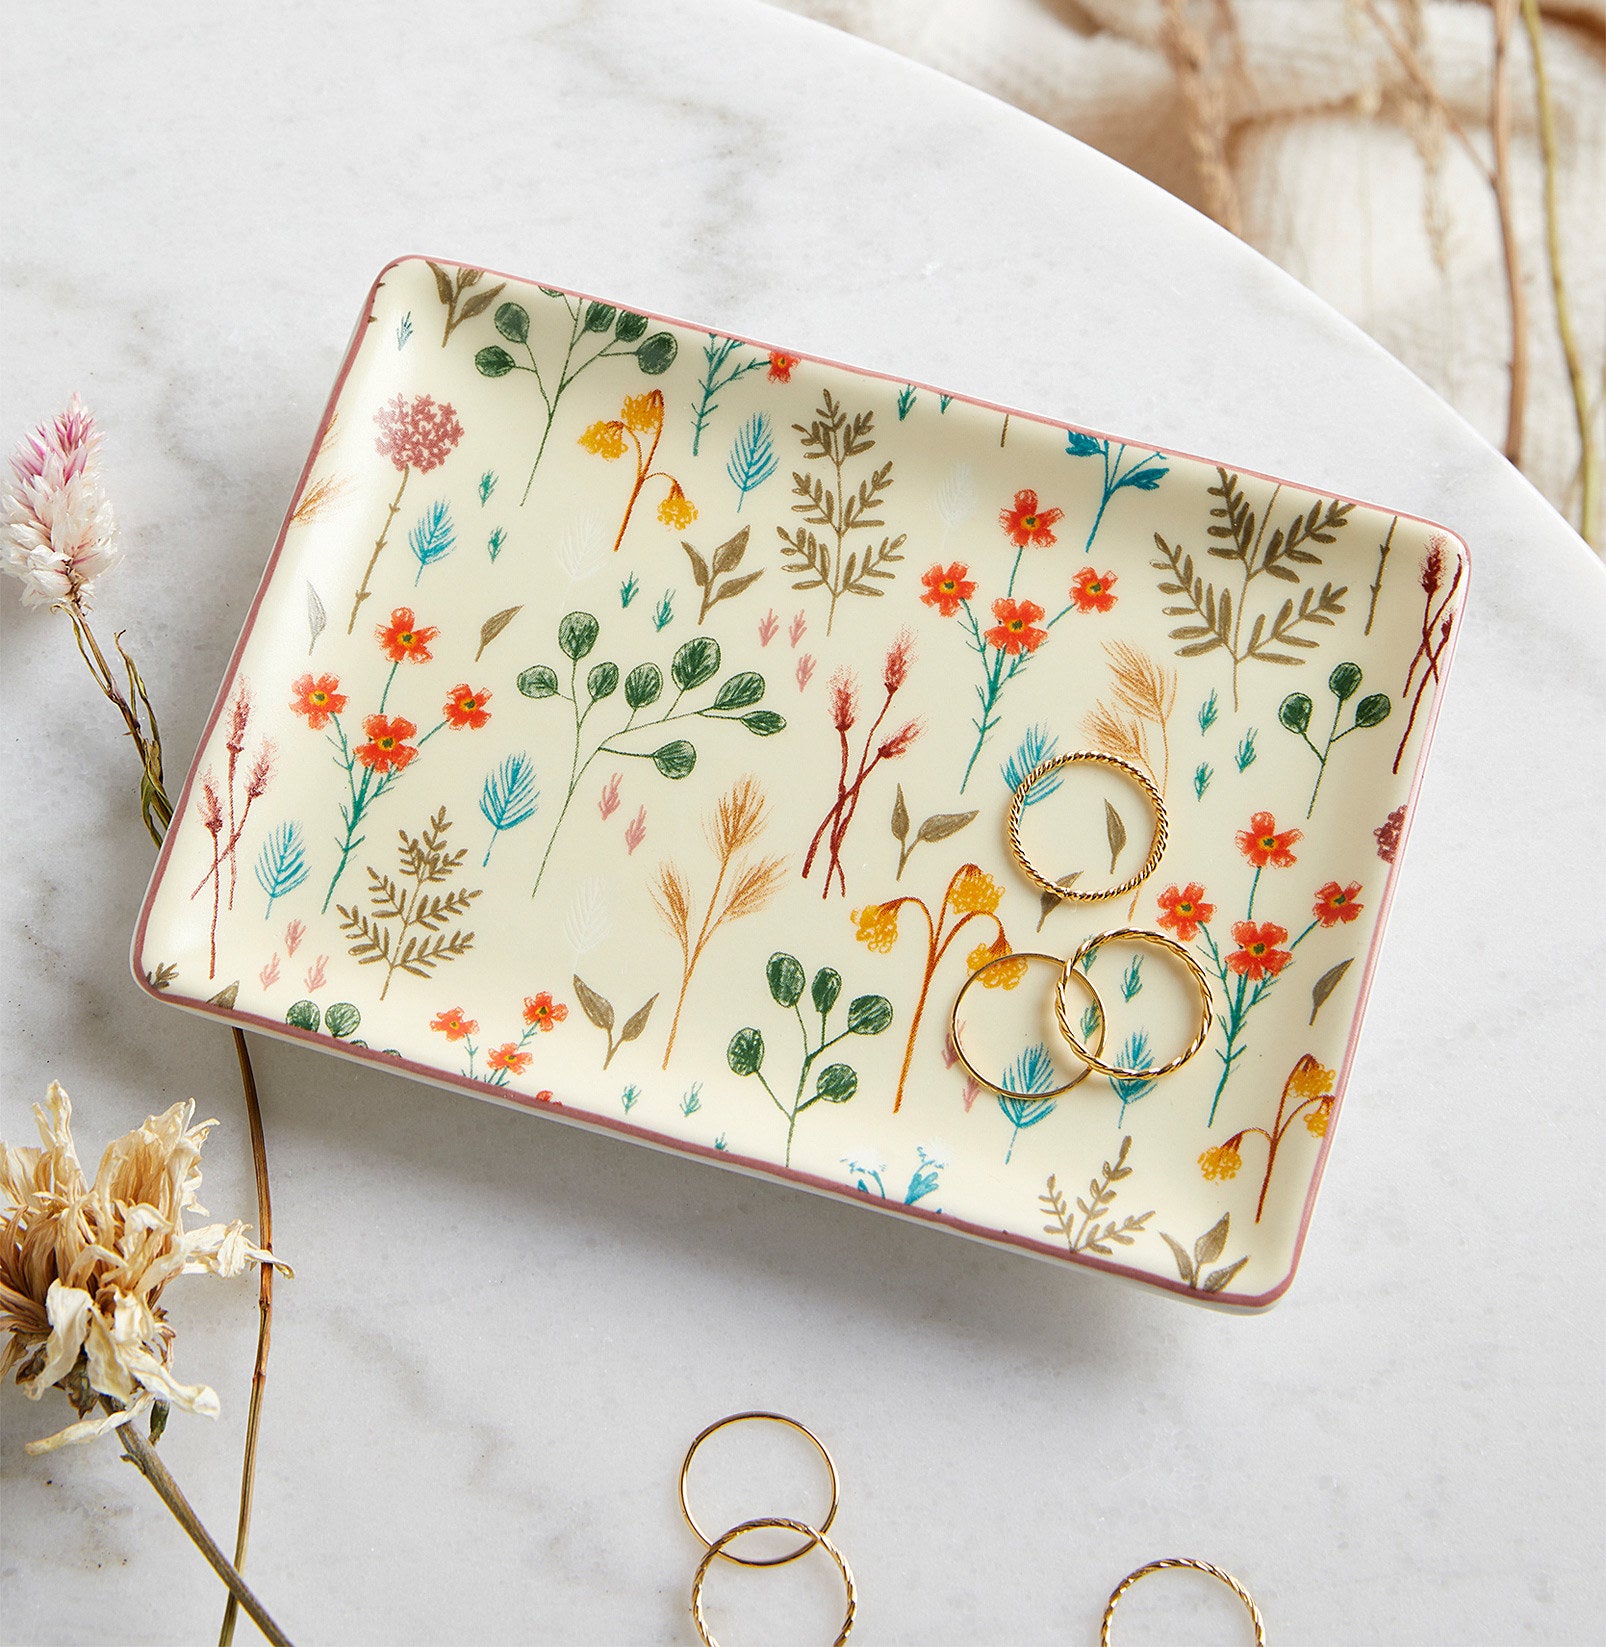 A rectangular ceramic dish with three rings on it